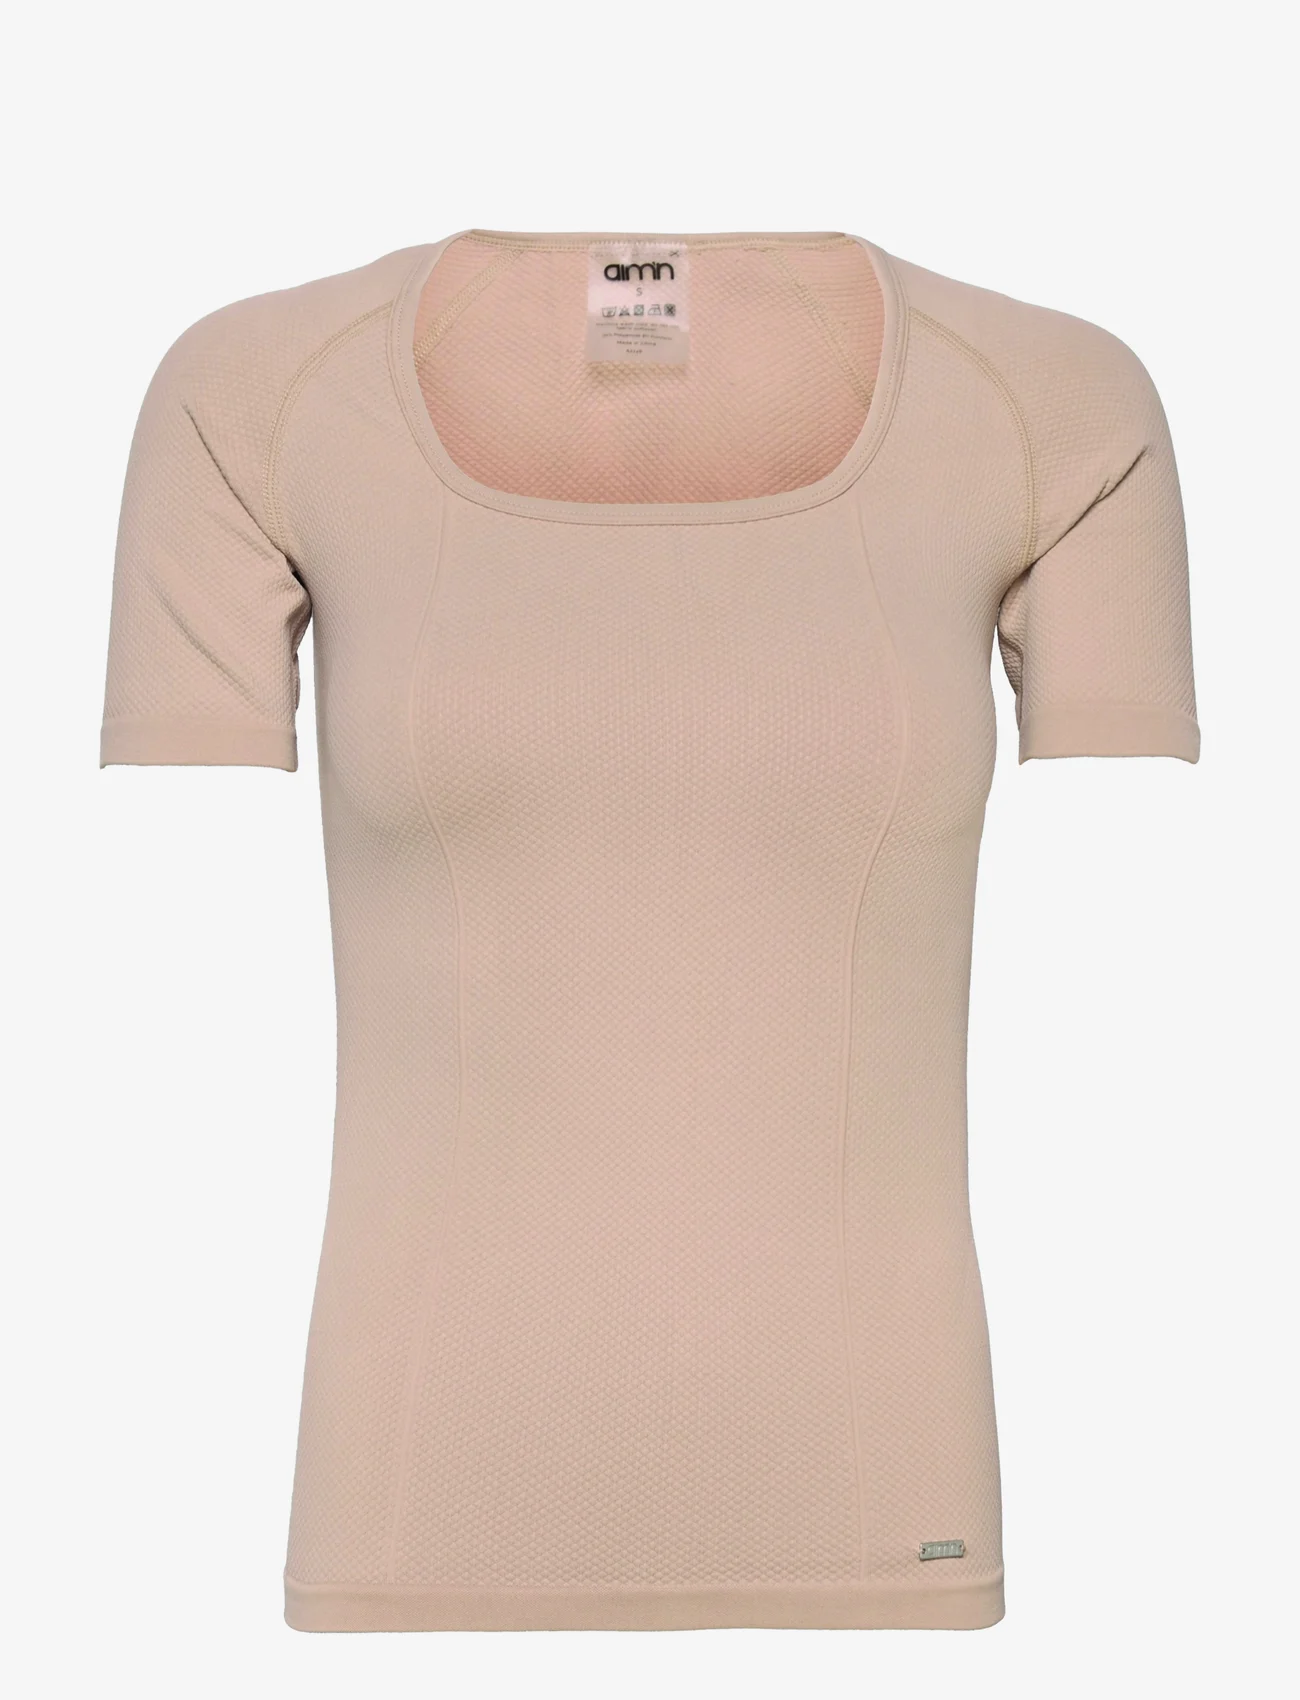 AIM'N - Luxe Seamless Short Sleeve - t-shirts - solid beige - 0